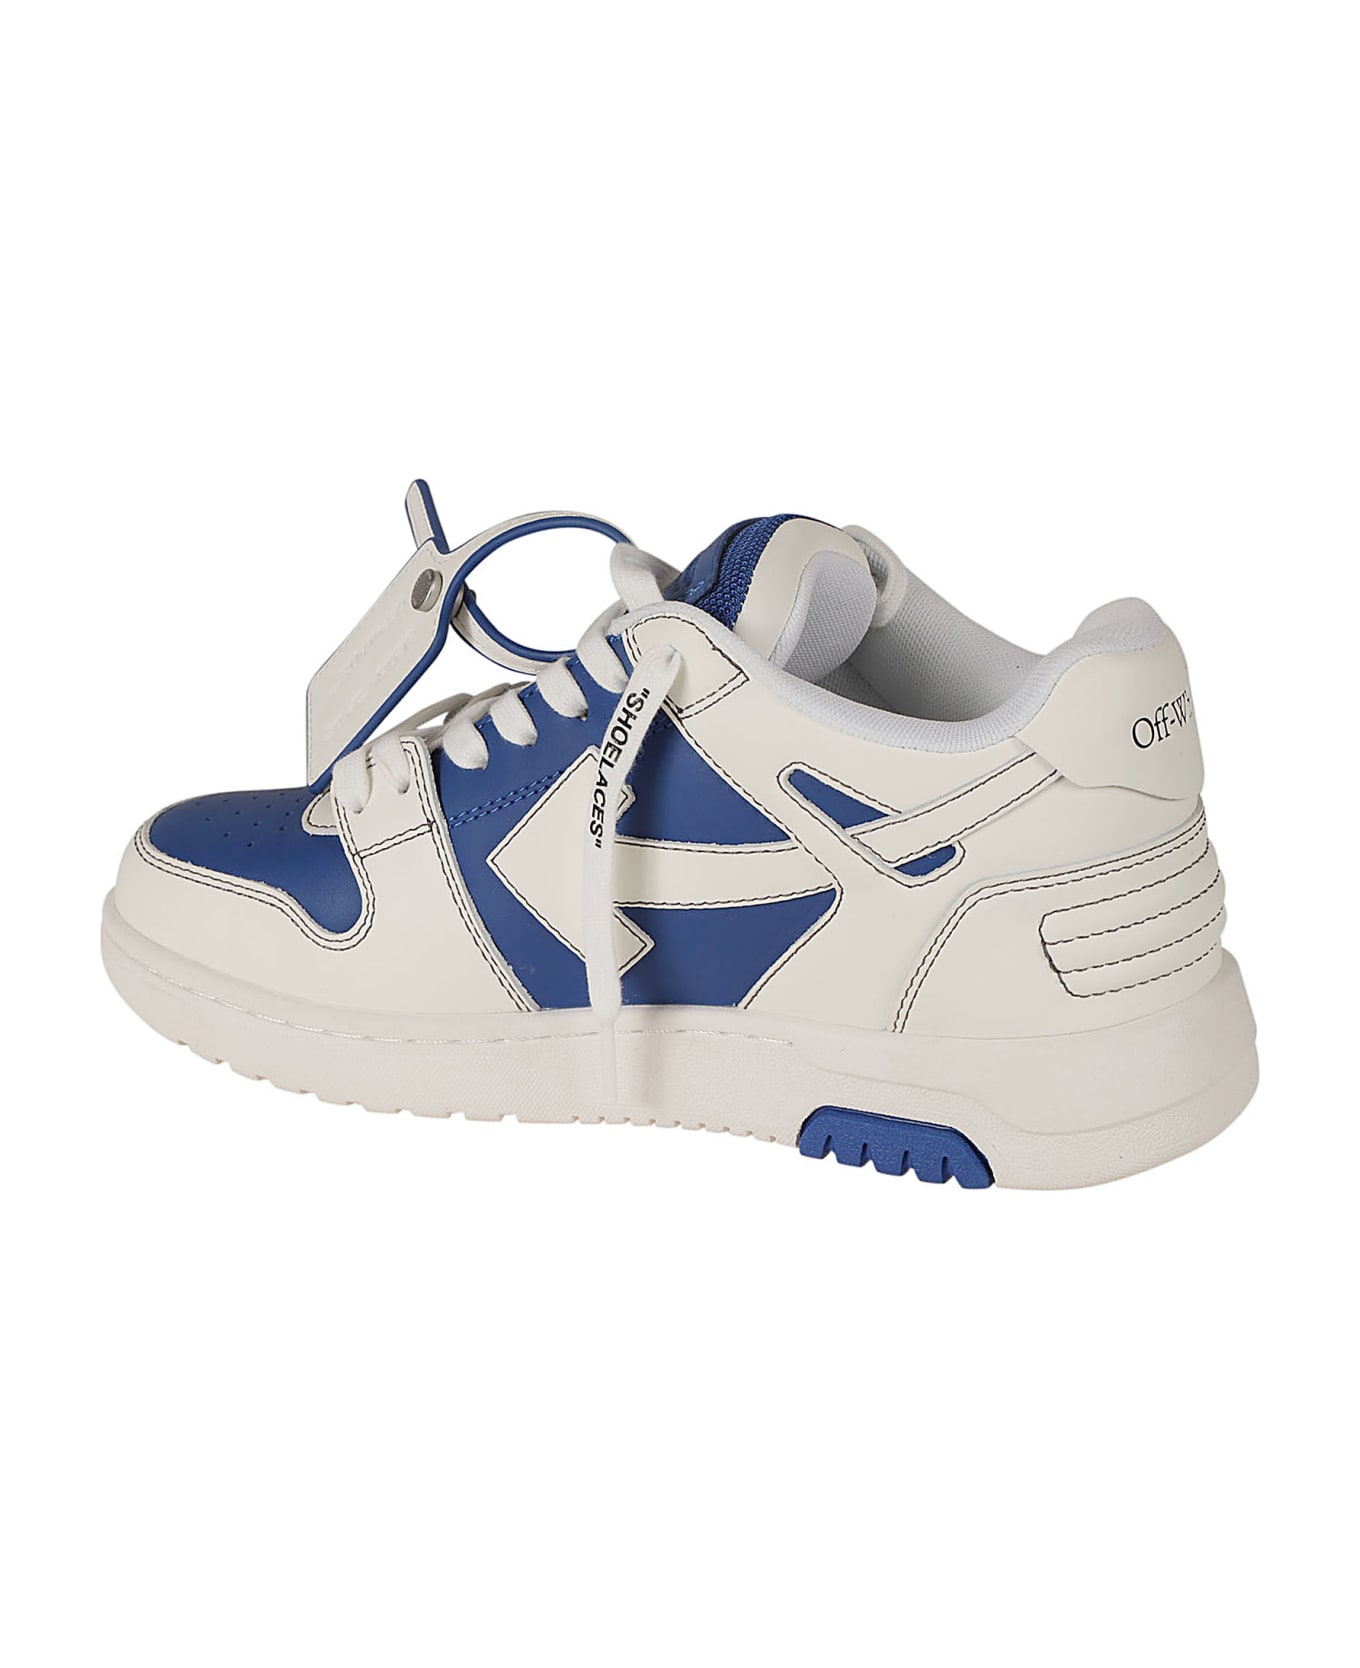 Off-White Out Of Office Sneakers - Navy Blue/Off White スニーカー